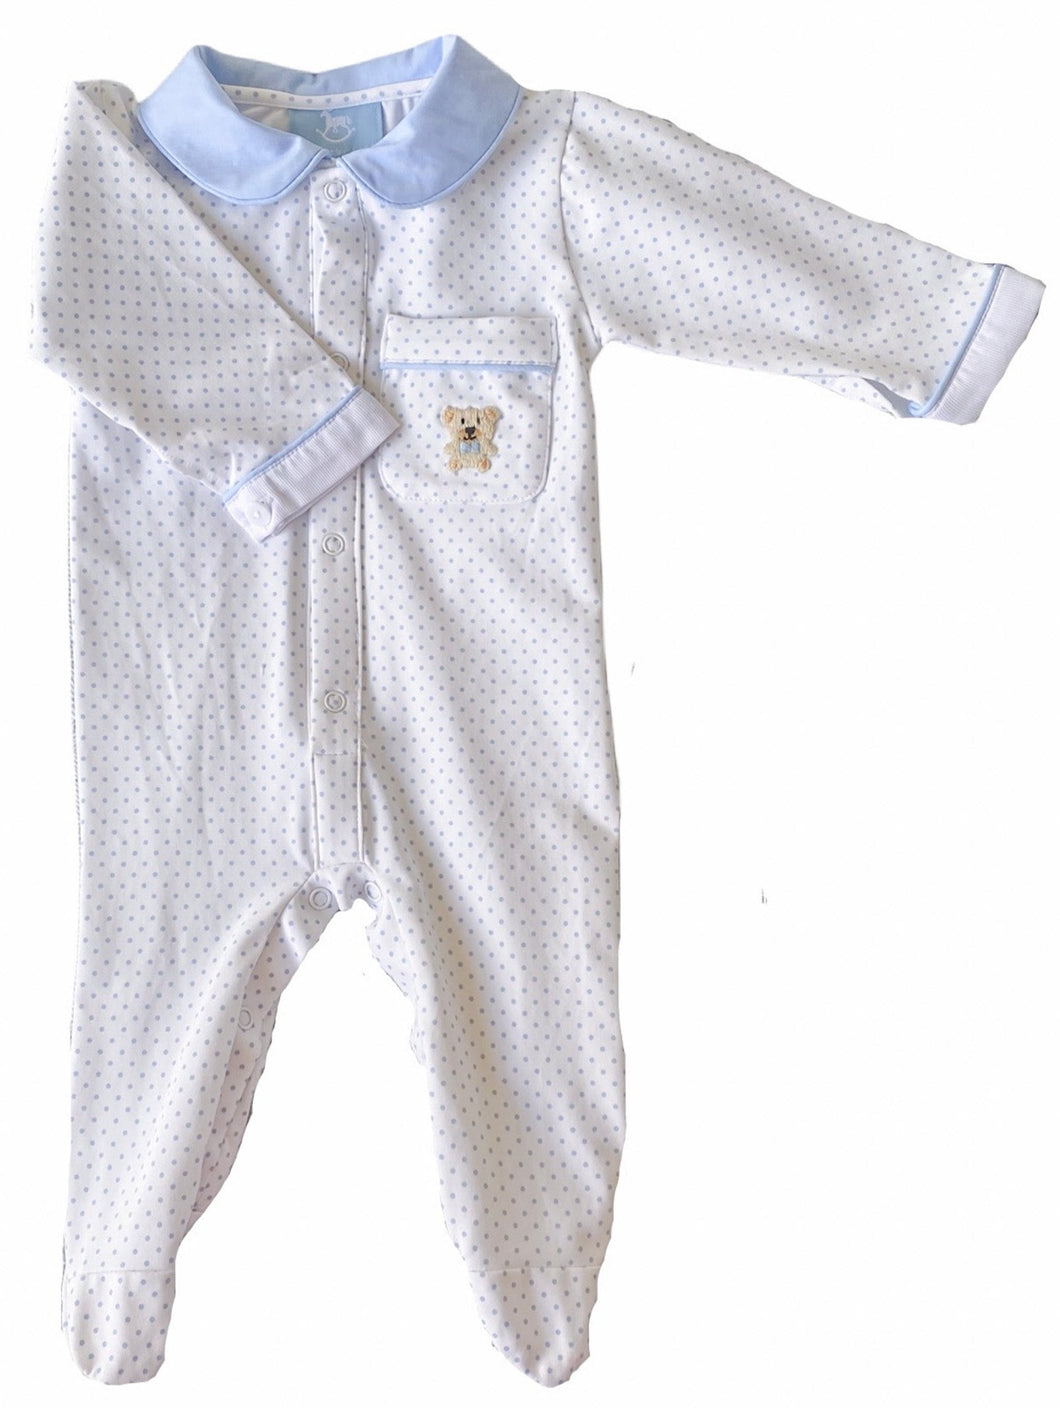 The Layette Coverall - Blue Teddy